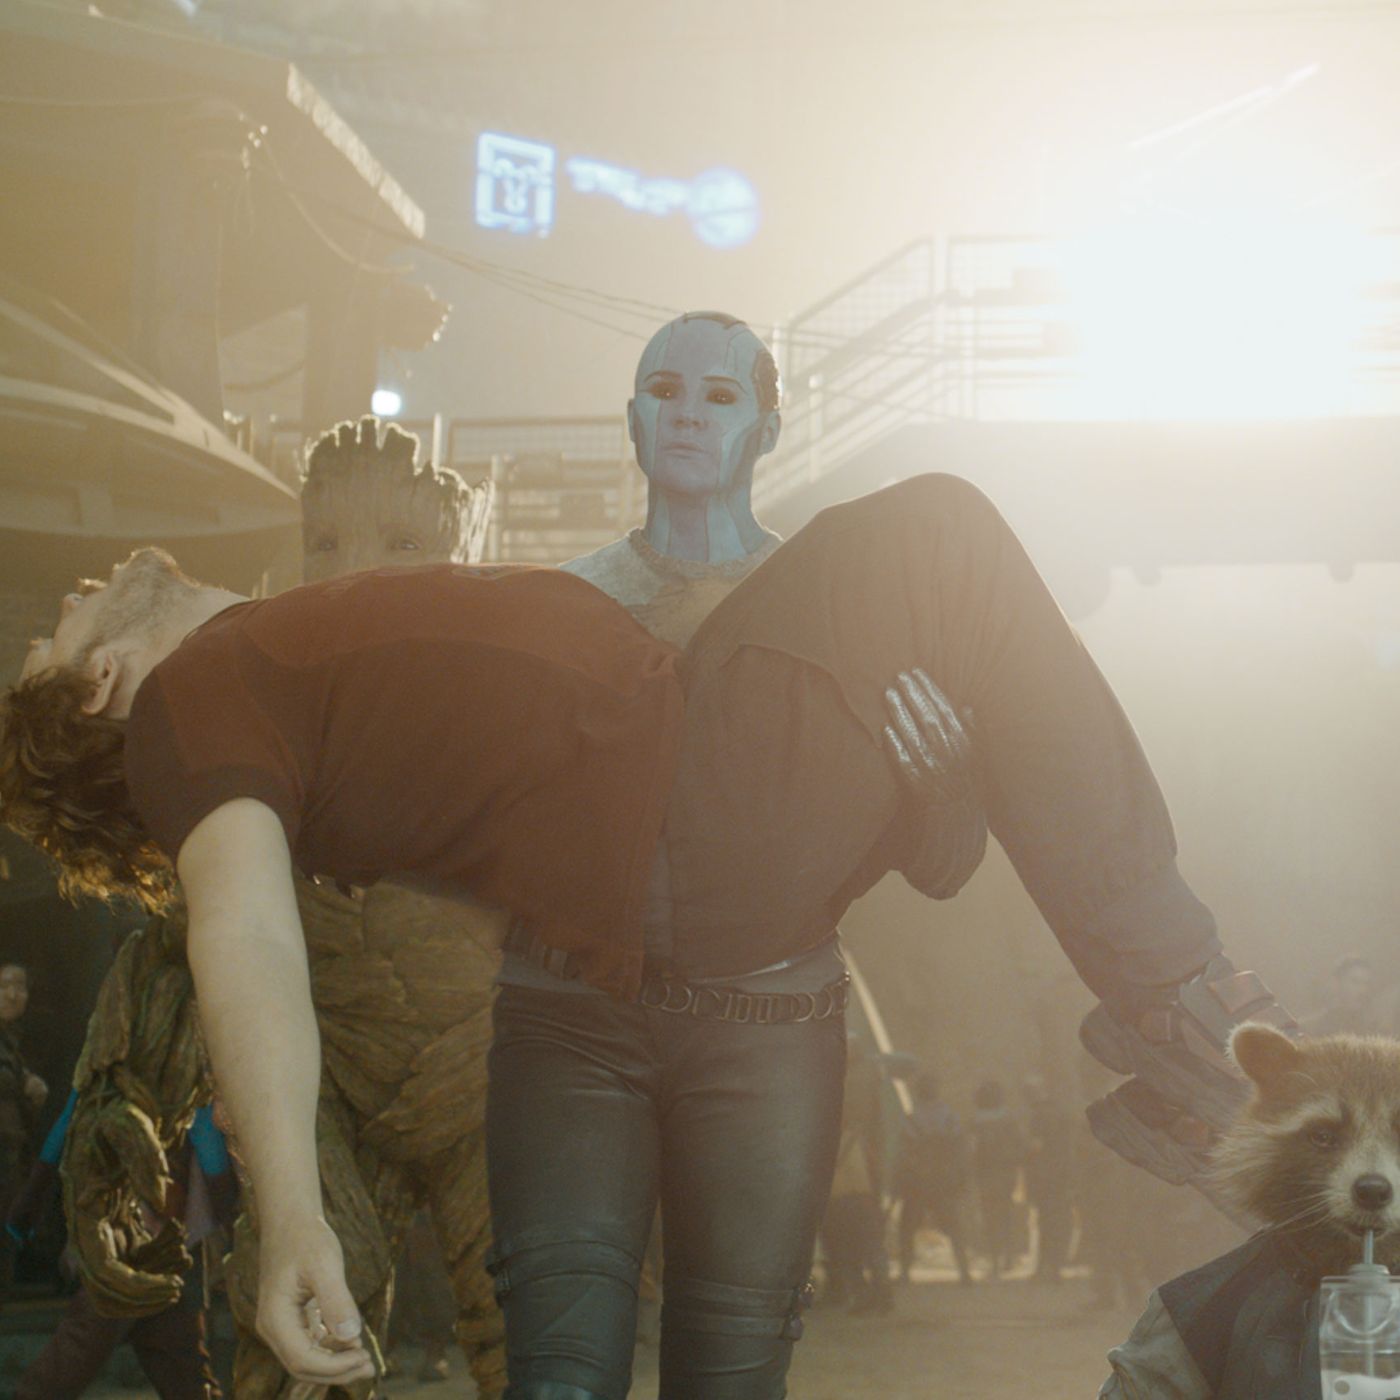 Reveals Most-Replayed Scene In Guardians of the Galaxy 3 Trailer